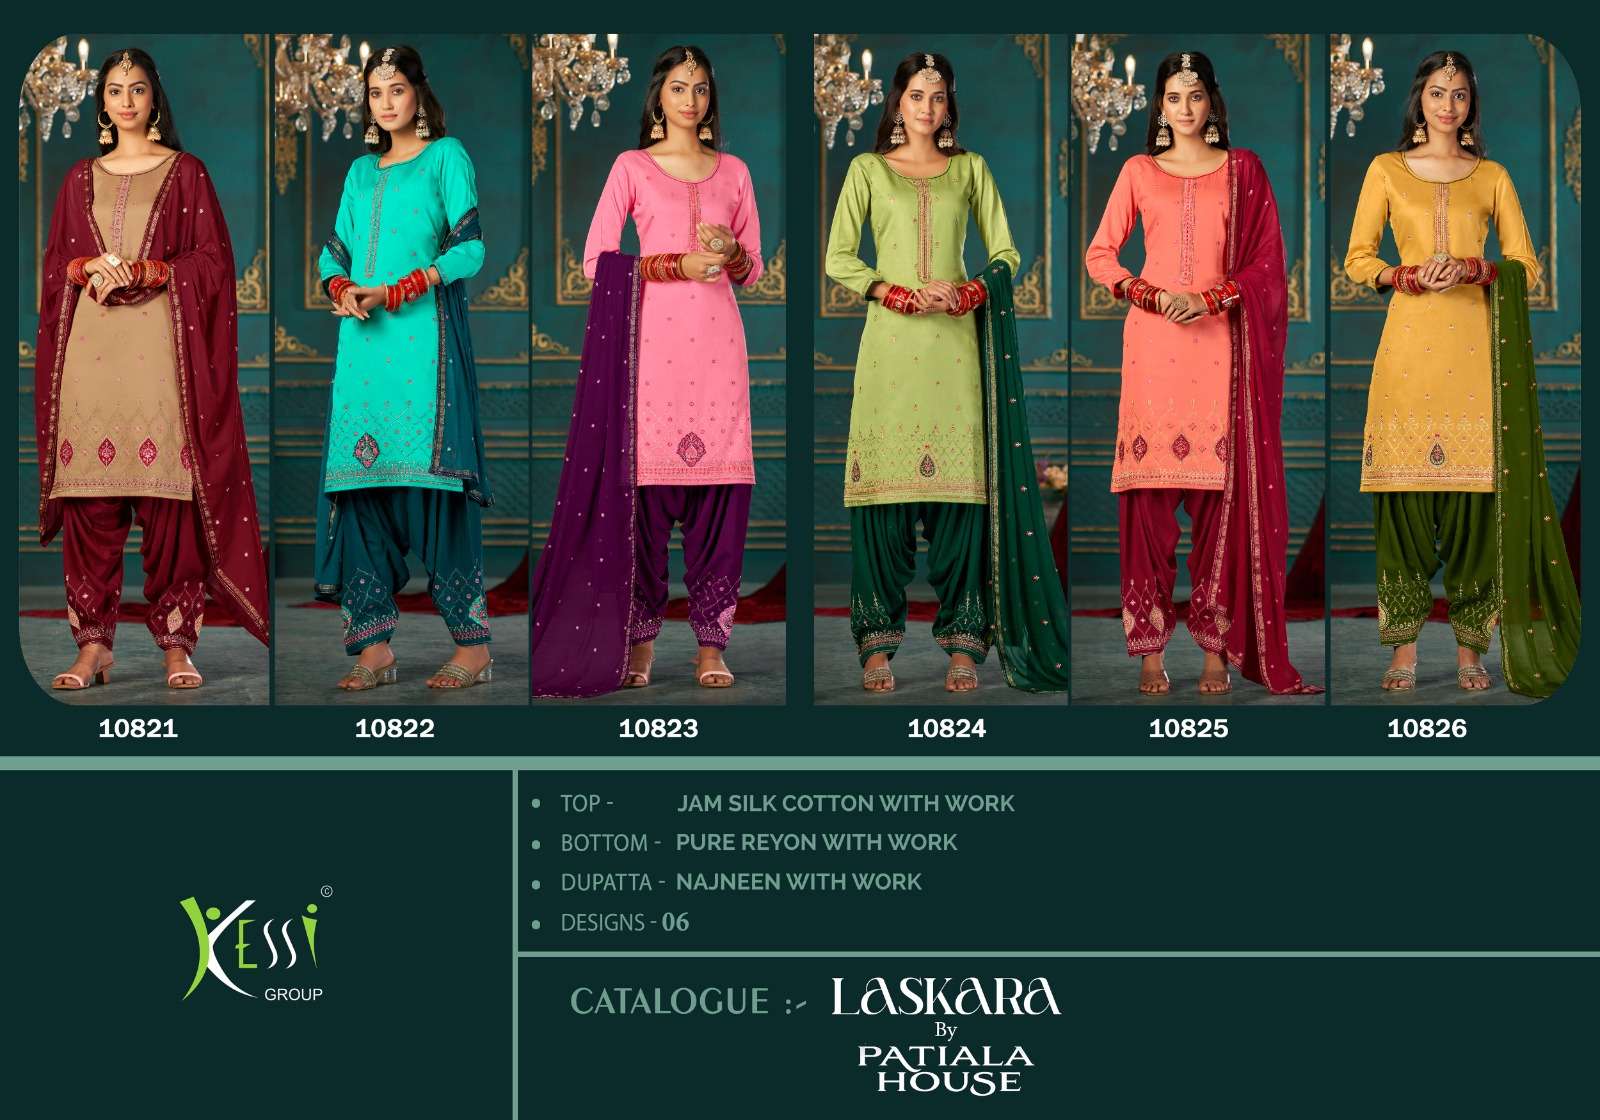 Laskara By Kessi Fabrics 18021 To 18026 Series Beautiful Stylish Festive Suits Fancy Colorful Casual Wear & Ethnic Wear & Ready To Wear Jam Silk Cotton Embroidered Dresses At Wholesale Price